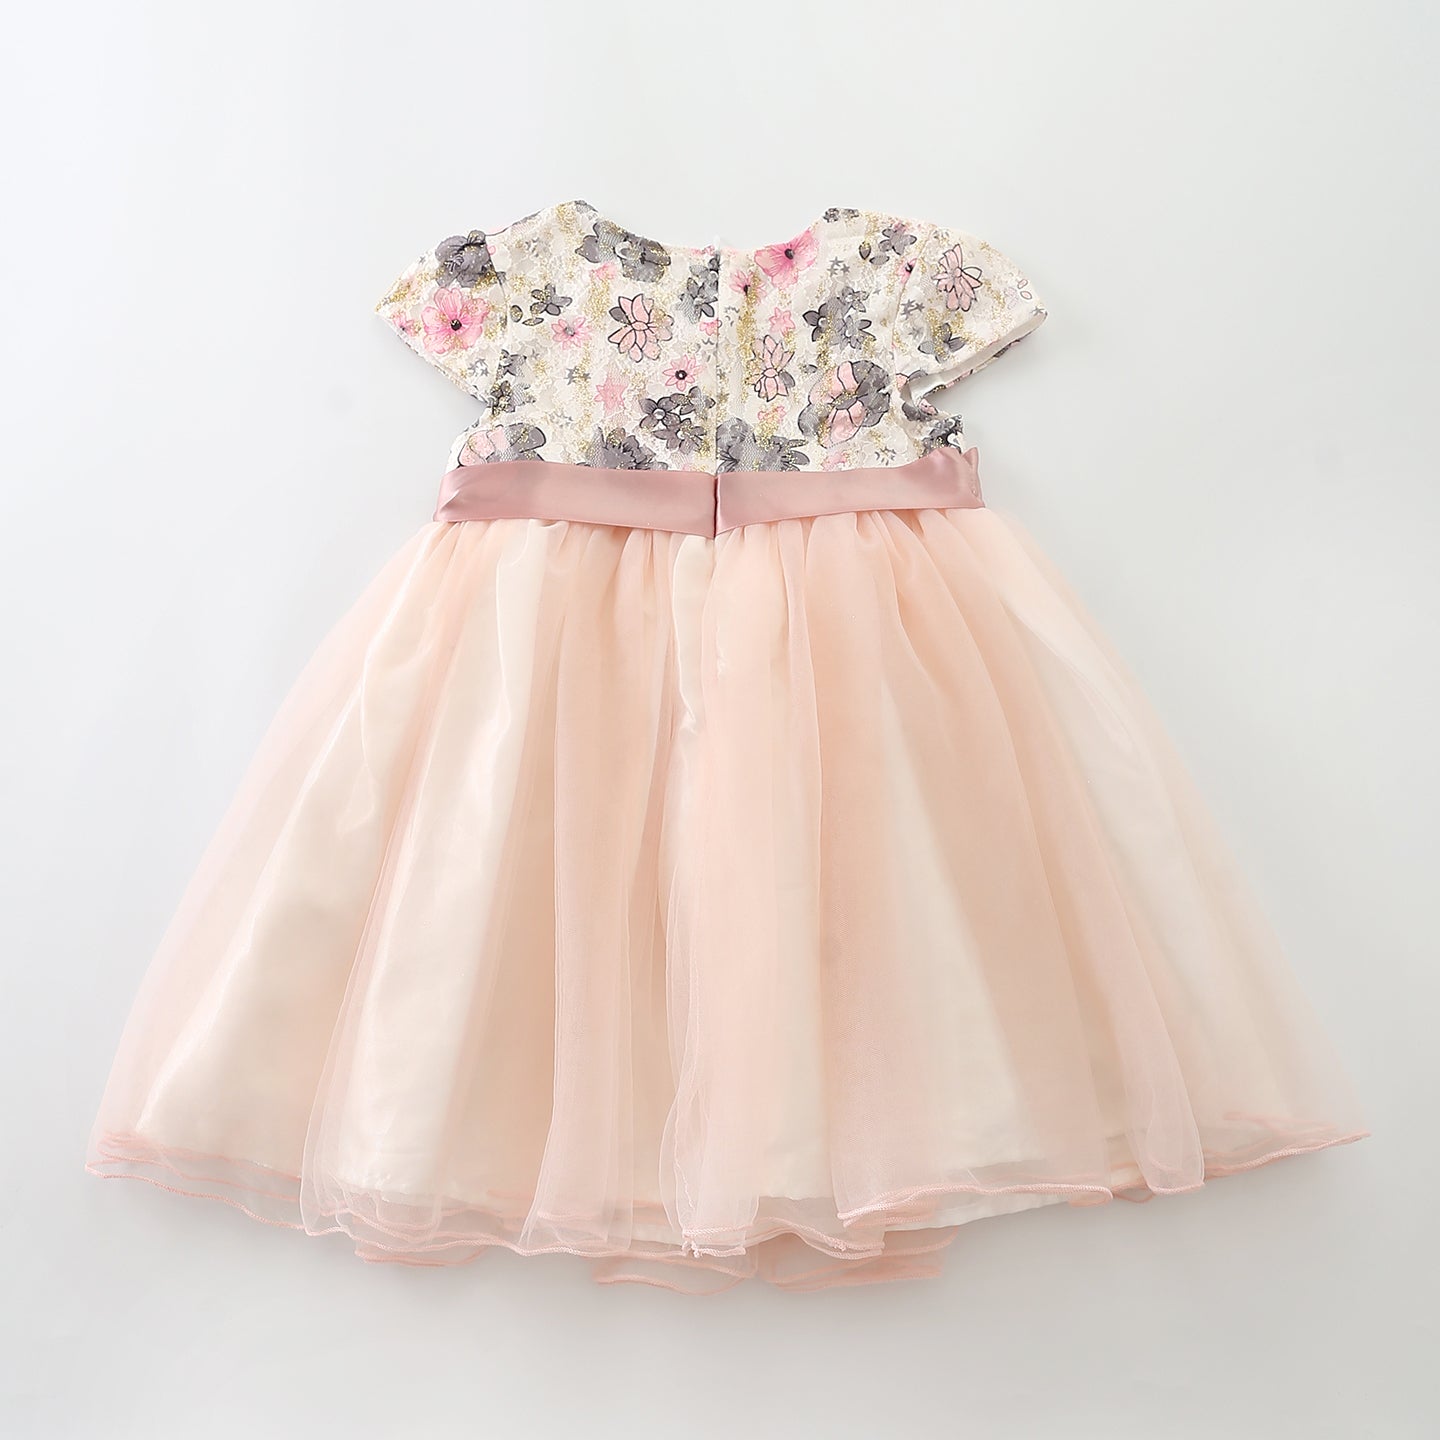 Girl's Peach Lace Party Dress